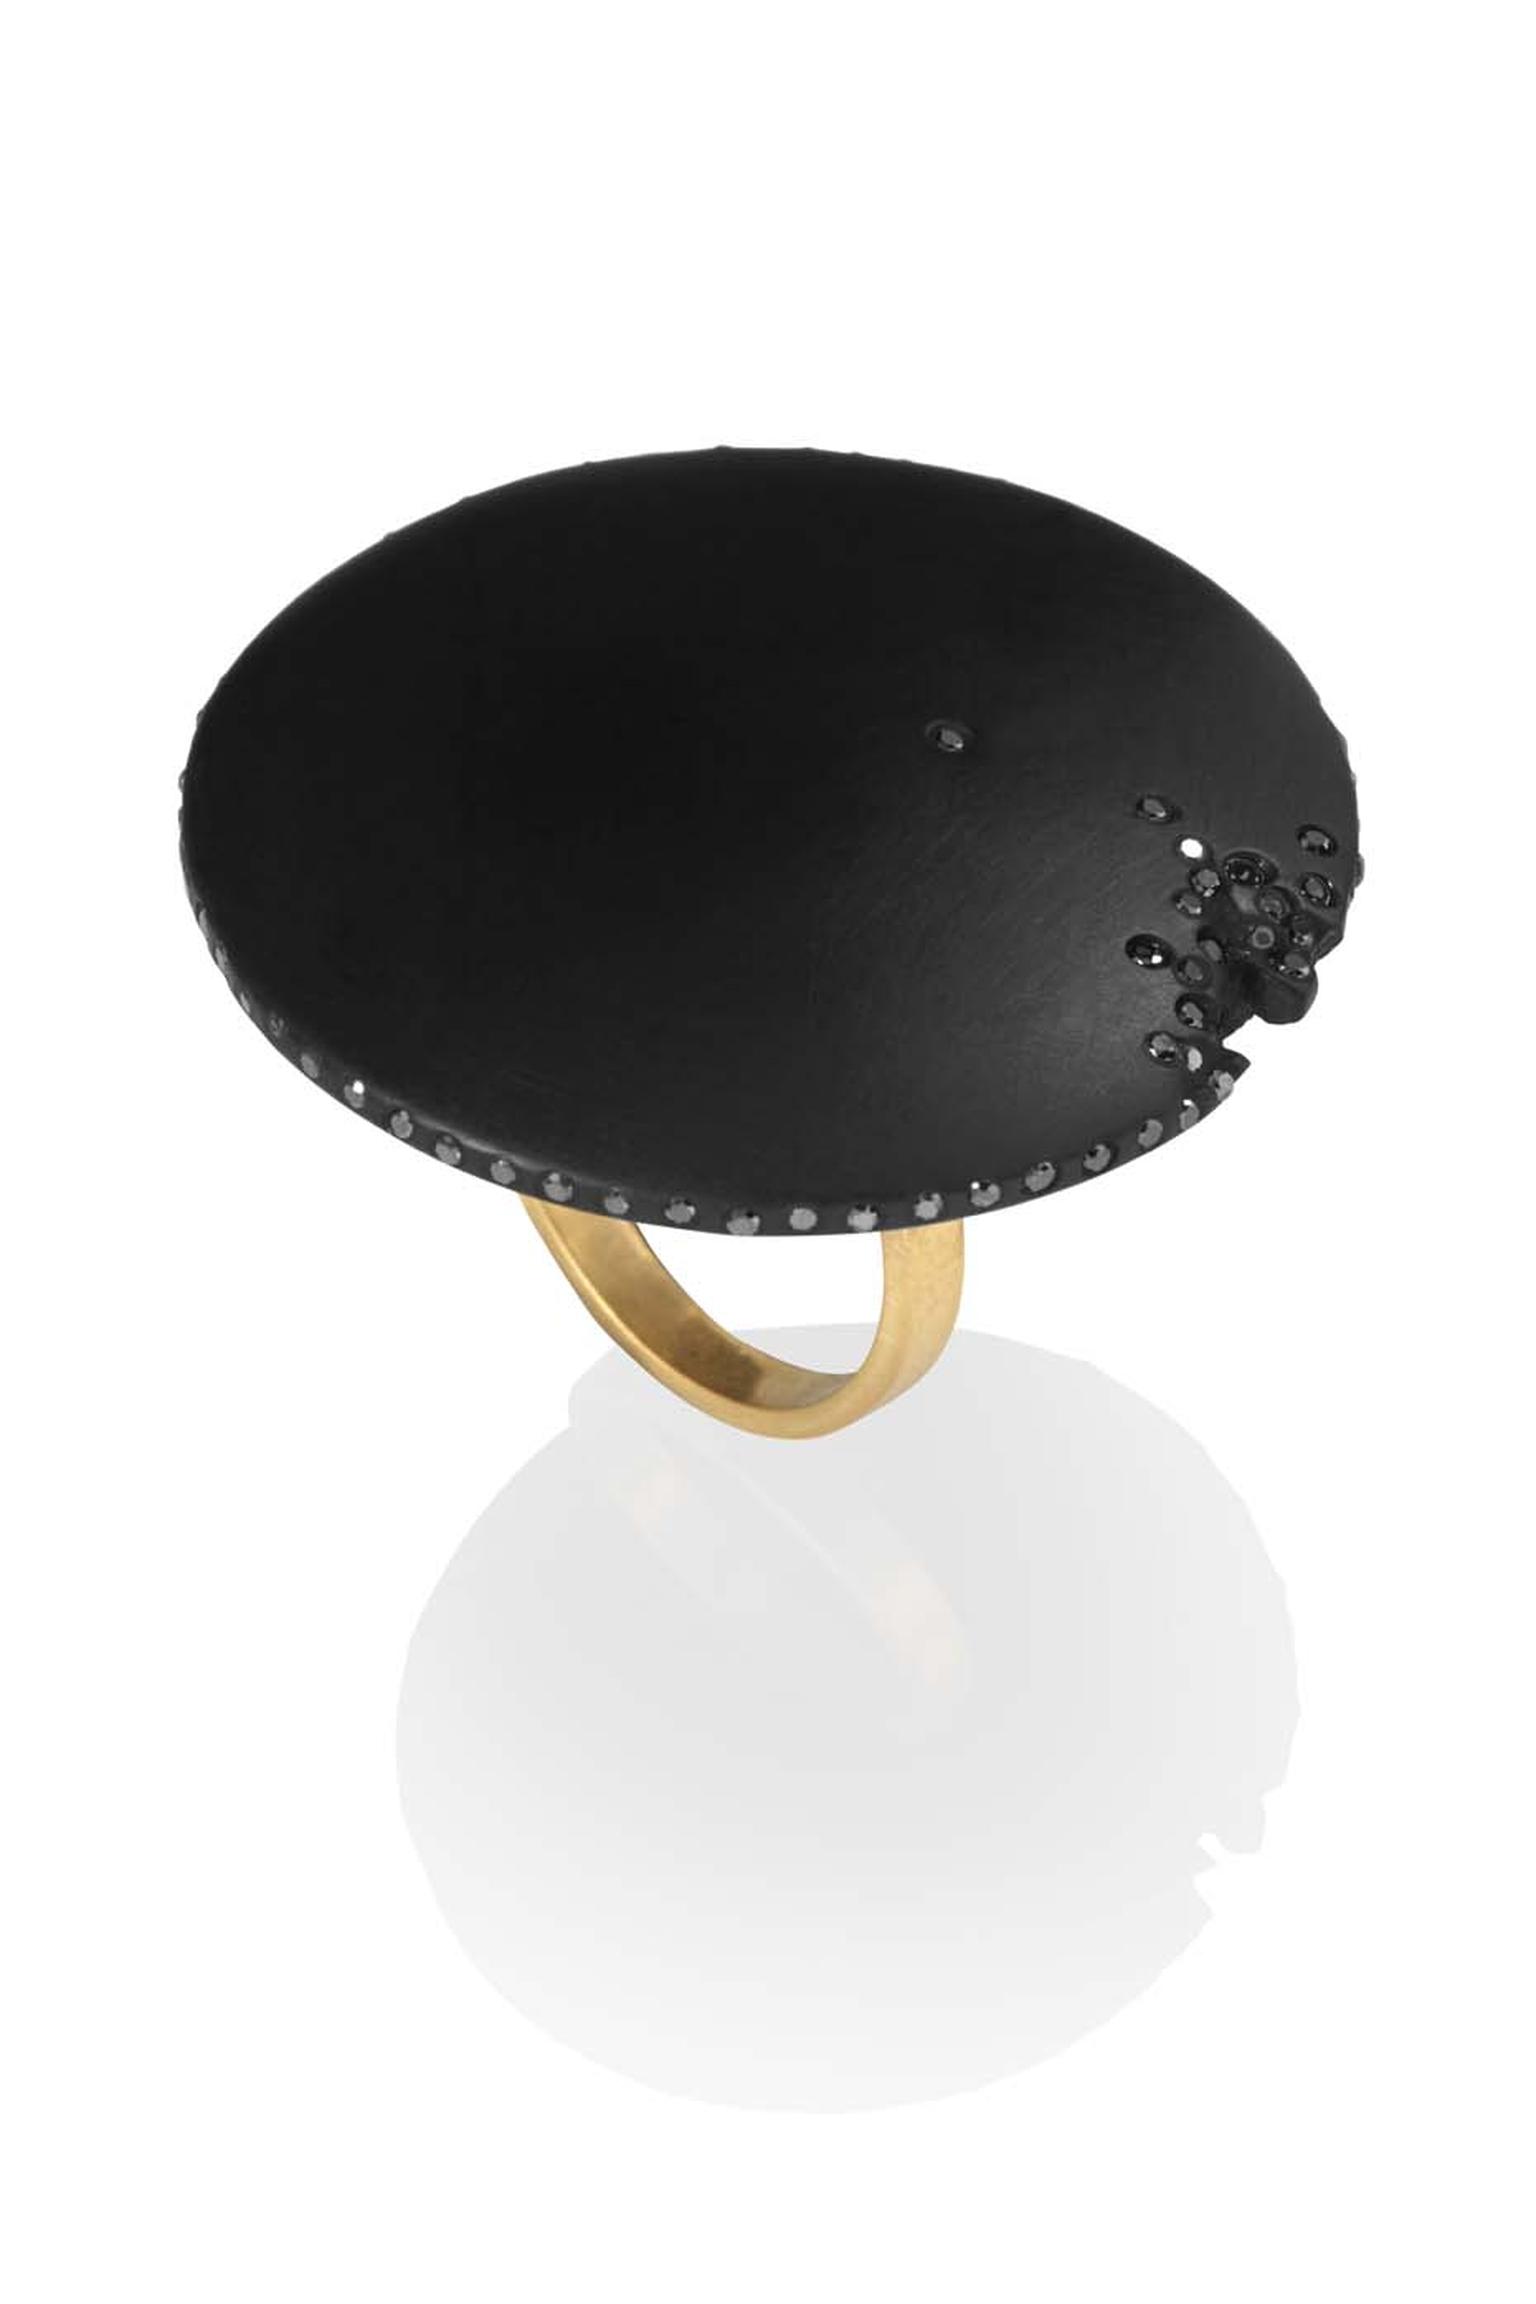 Jacqueline Cullen Black Diamond Disc cocktail ring crafted from Whitby jet.